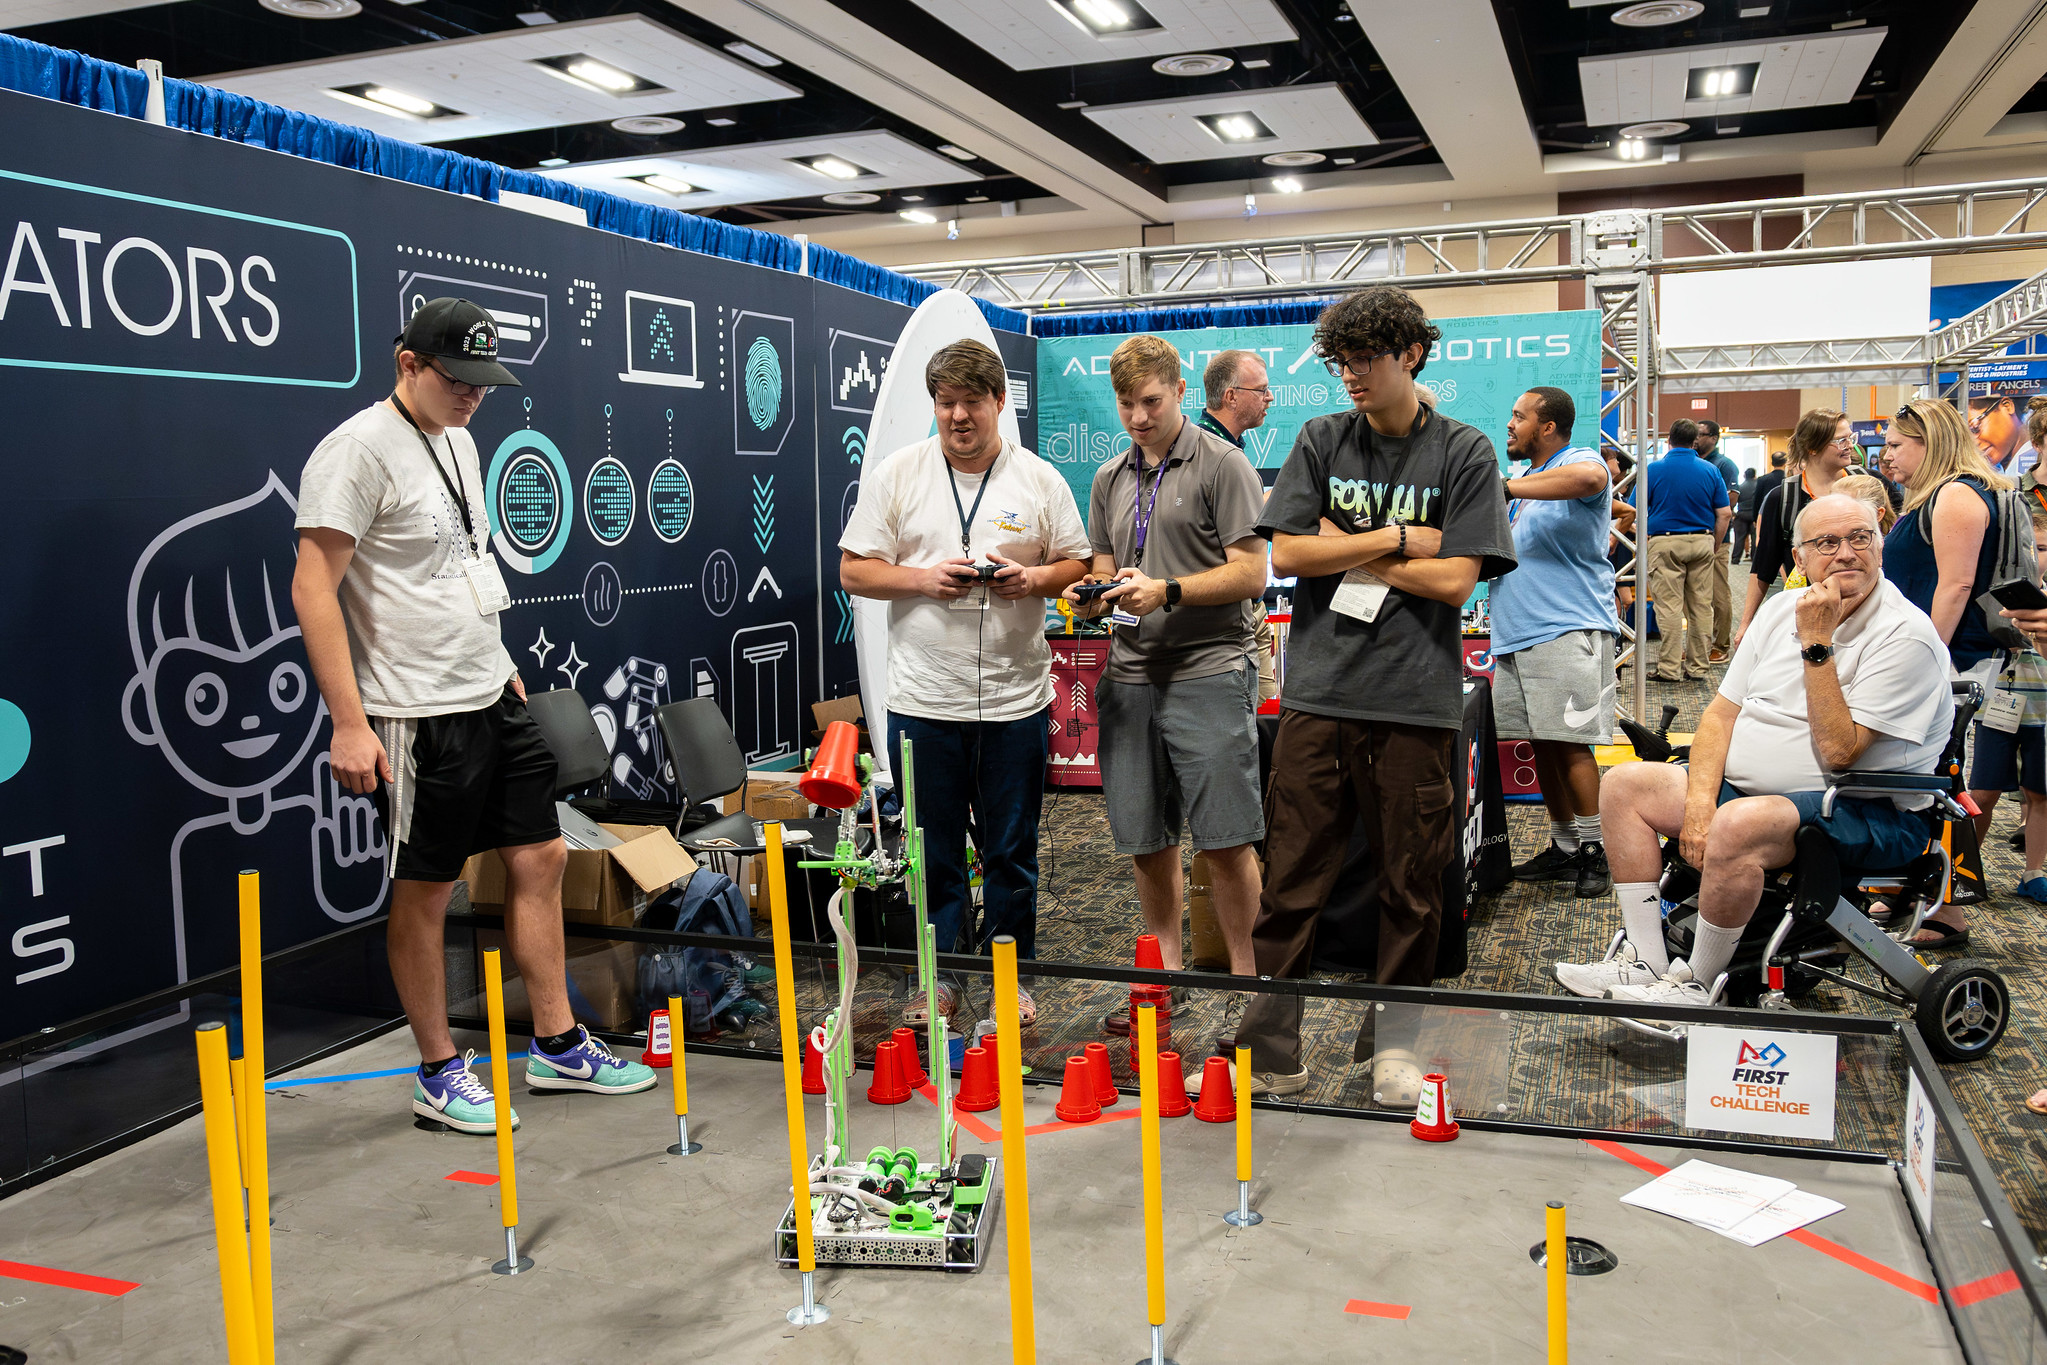 Teens try out their driving skills in the exhibit hall at the "Something Better" educators' convention.